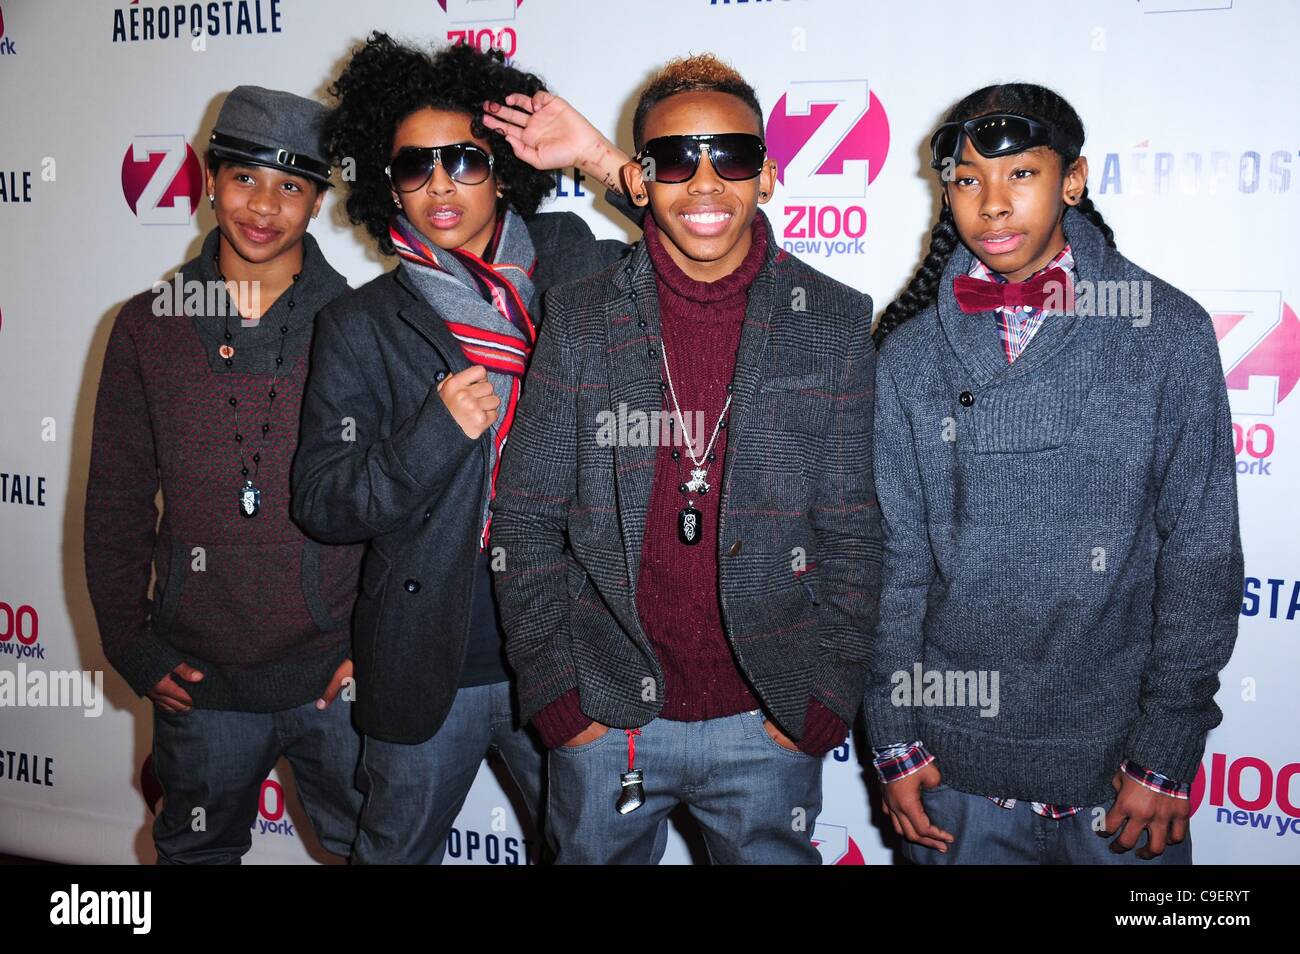 Roc Royal, Princeton, Prodigy, Ray Ray, Mindless Behavior in attendance for Z100's Jingle Ball 2011 Concert, Madison Square Garden (MSG), New York, NY December 9, 2011. Photo By: Gregorio T. Binuya/Everett Collection Stock Photo